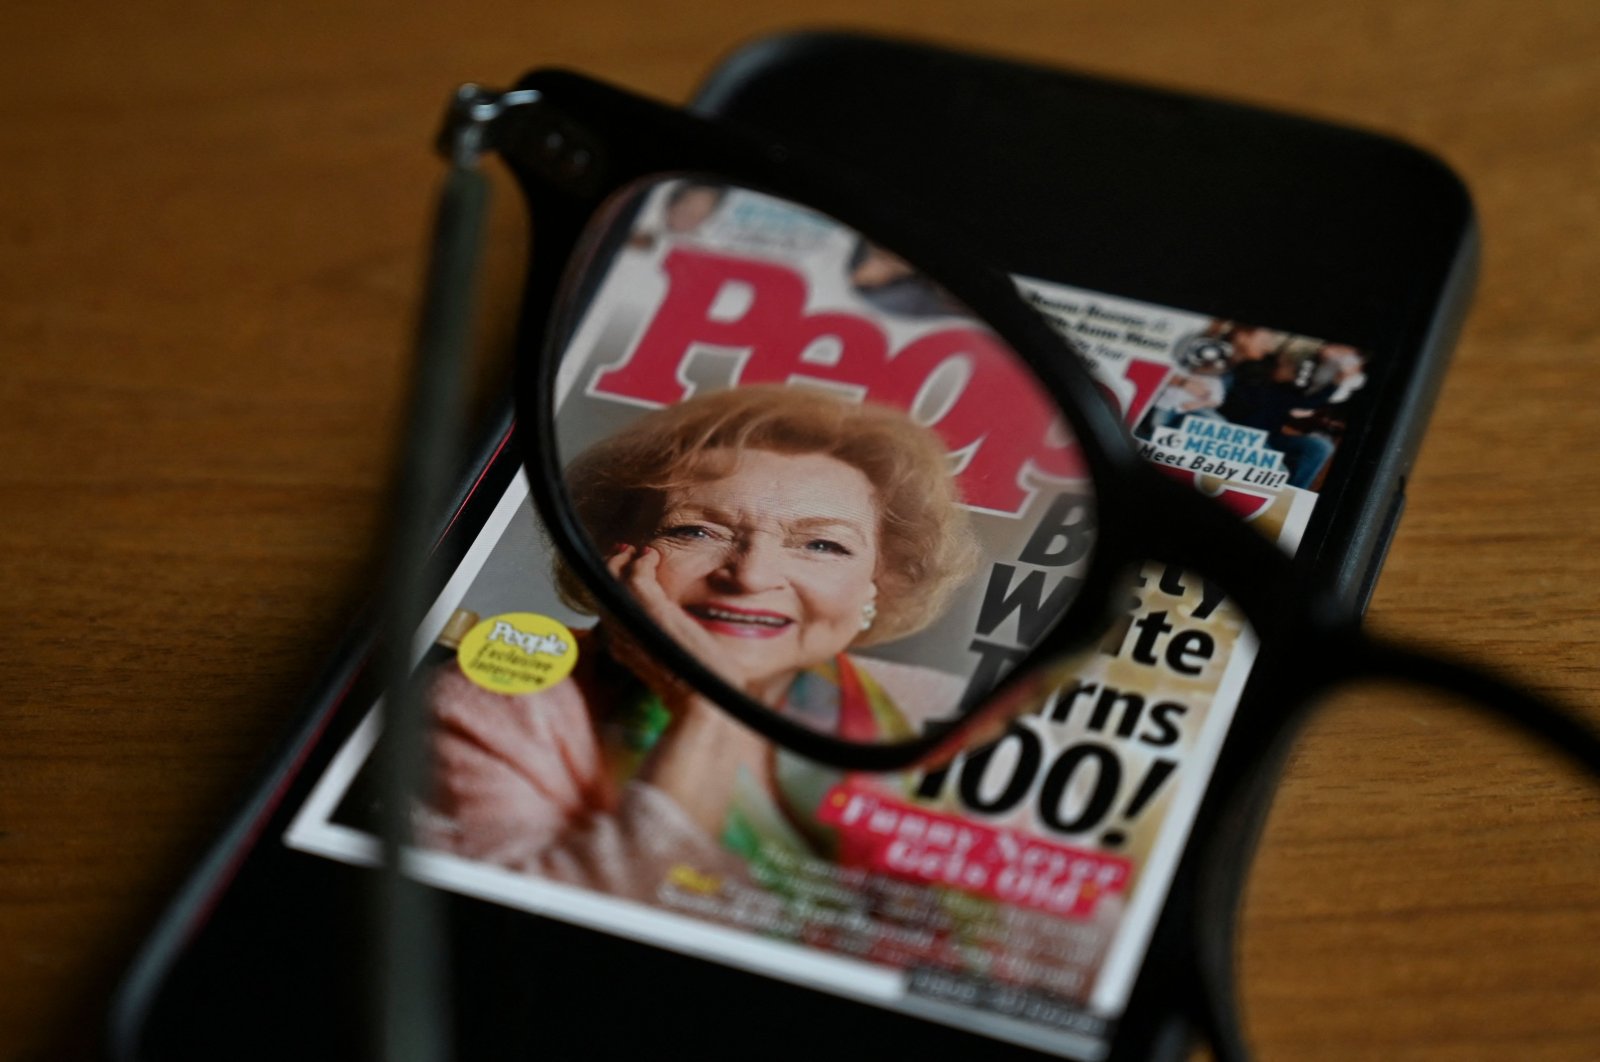 In this photo illustration produced Jan. 1, 2022, in Washington, D.C., a pair of glasses magnify the face of U.S. actress Betty White appearing on the cover of People Magazine. (AFP)